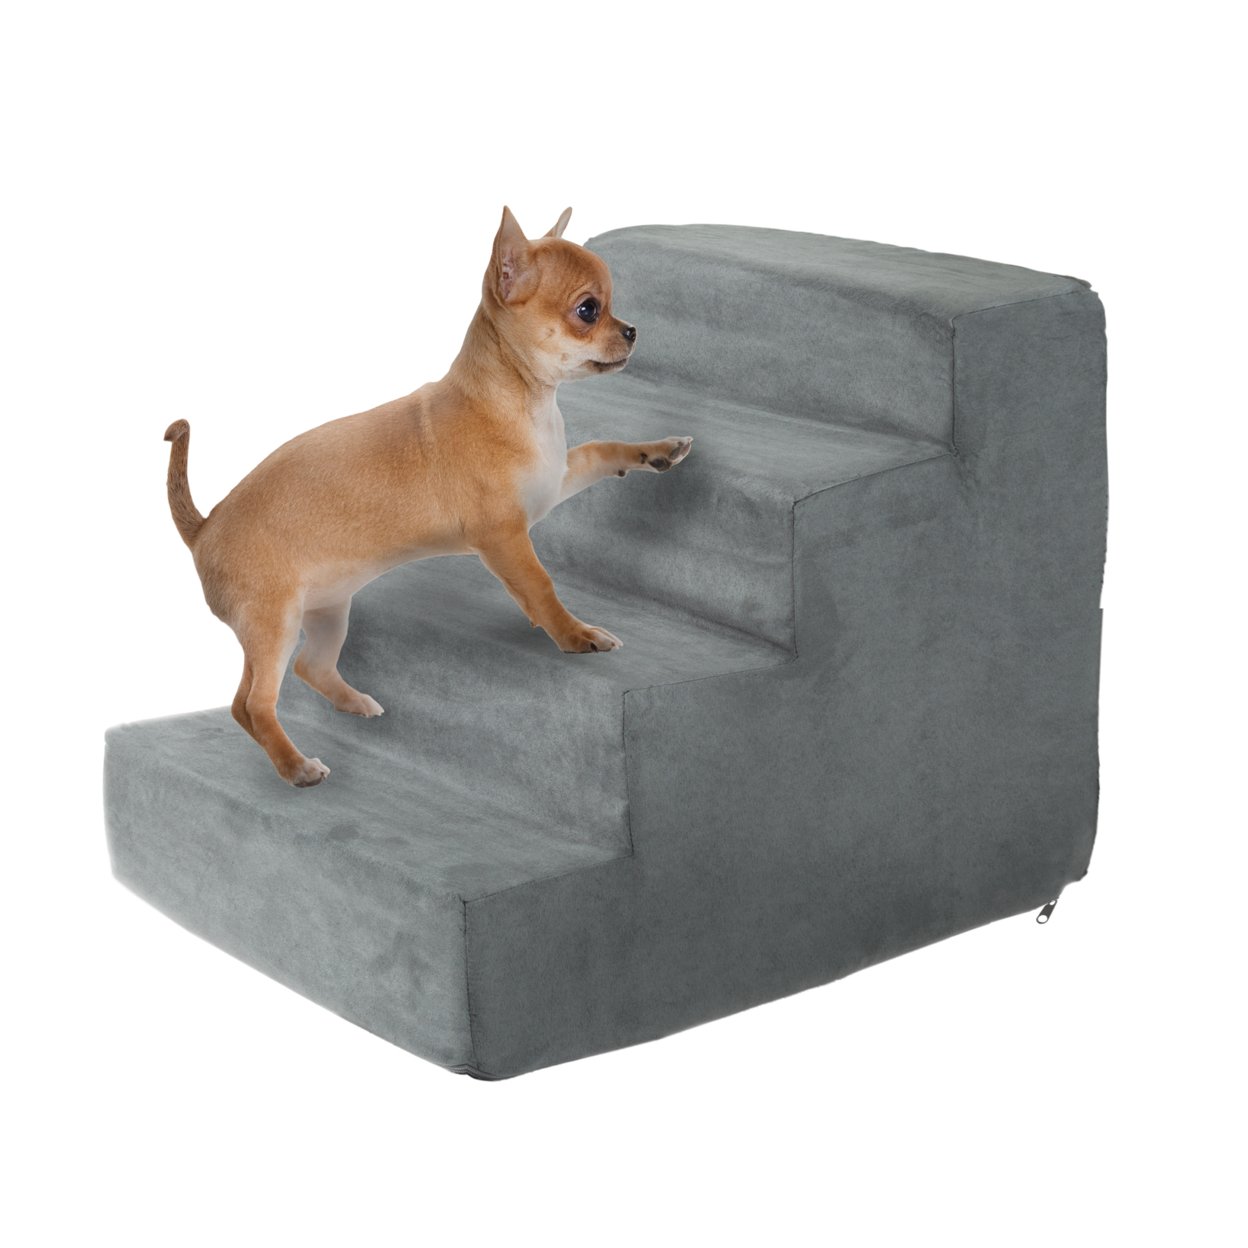 4 Steps High Density Foam Pet Stairs Removable Washable Zipper Cover 15 Inches High Small Dogs Cats Gray